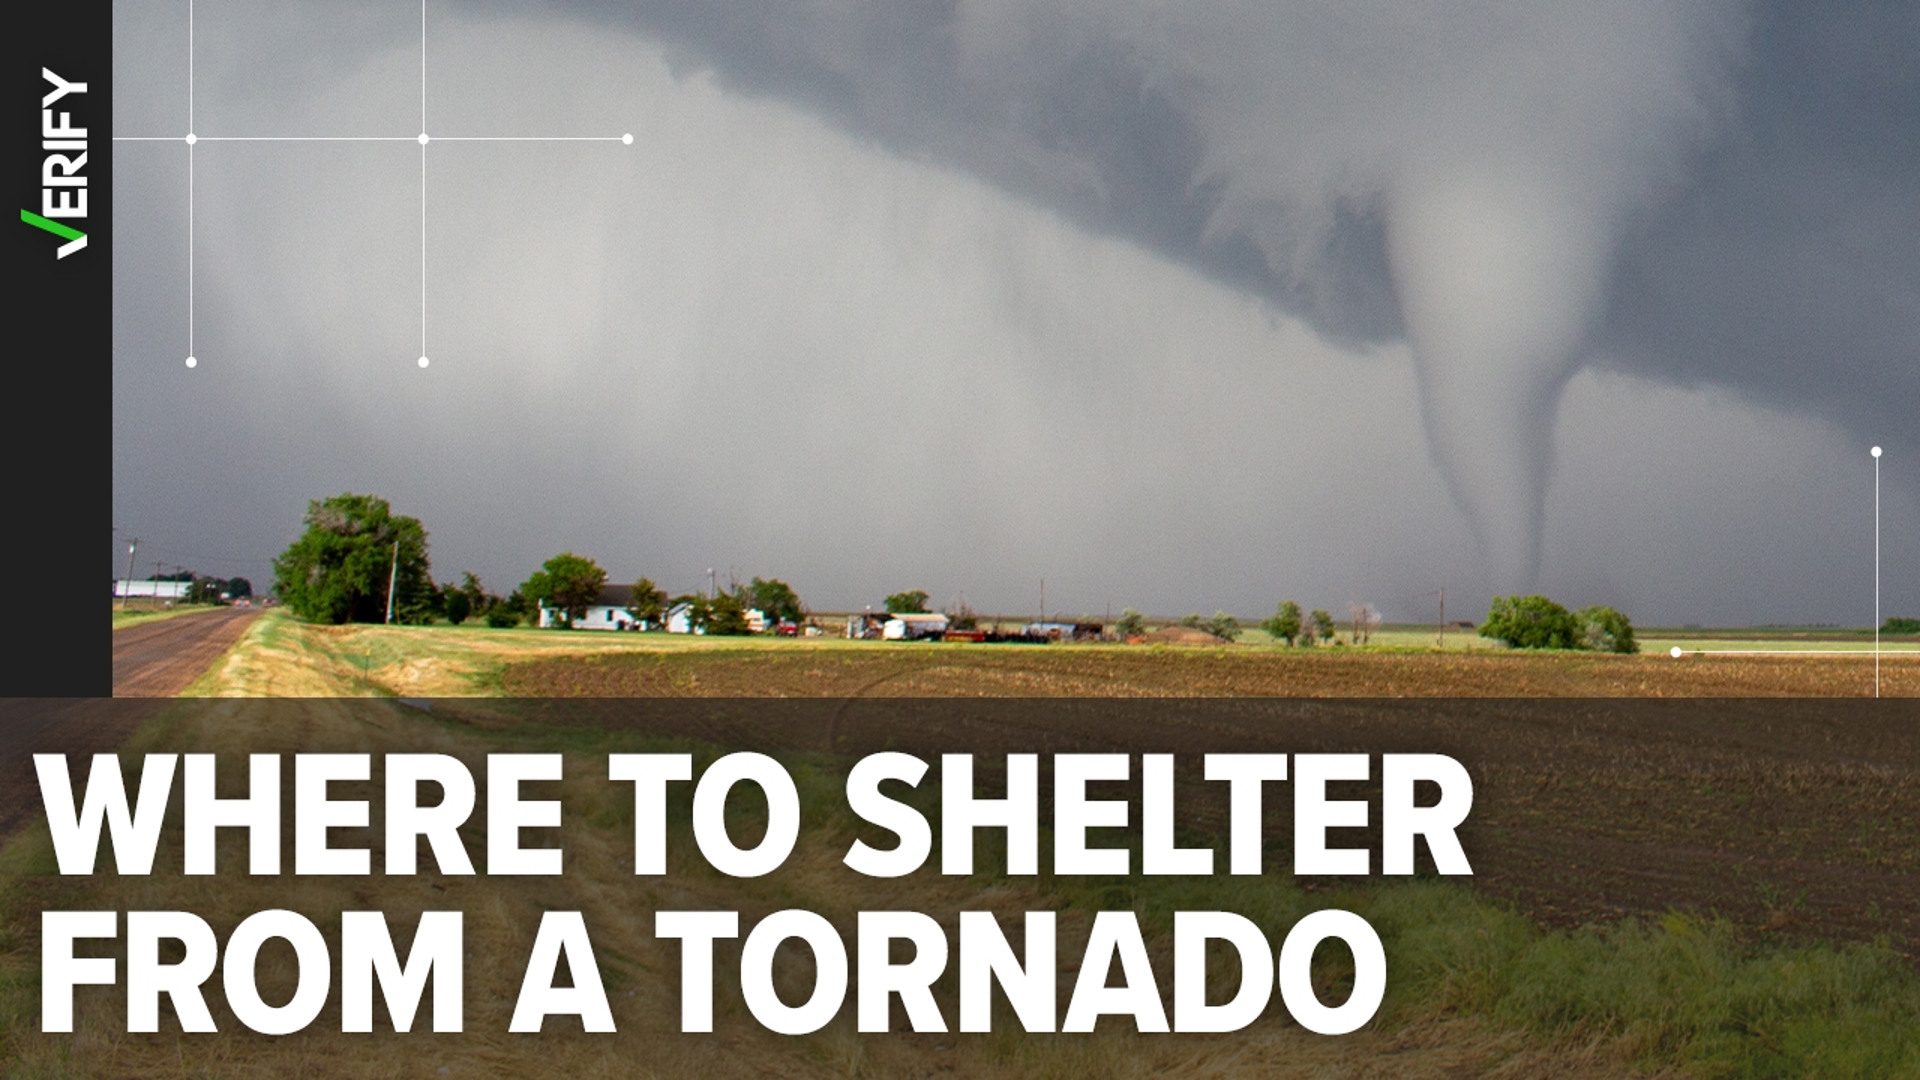 A basement is the safest place during a tornado. But what if you live in a home without one, an apartment or a mobile home? Here’s what to know about safety.